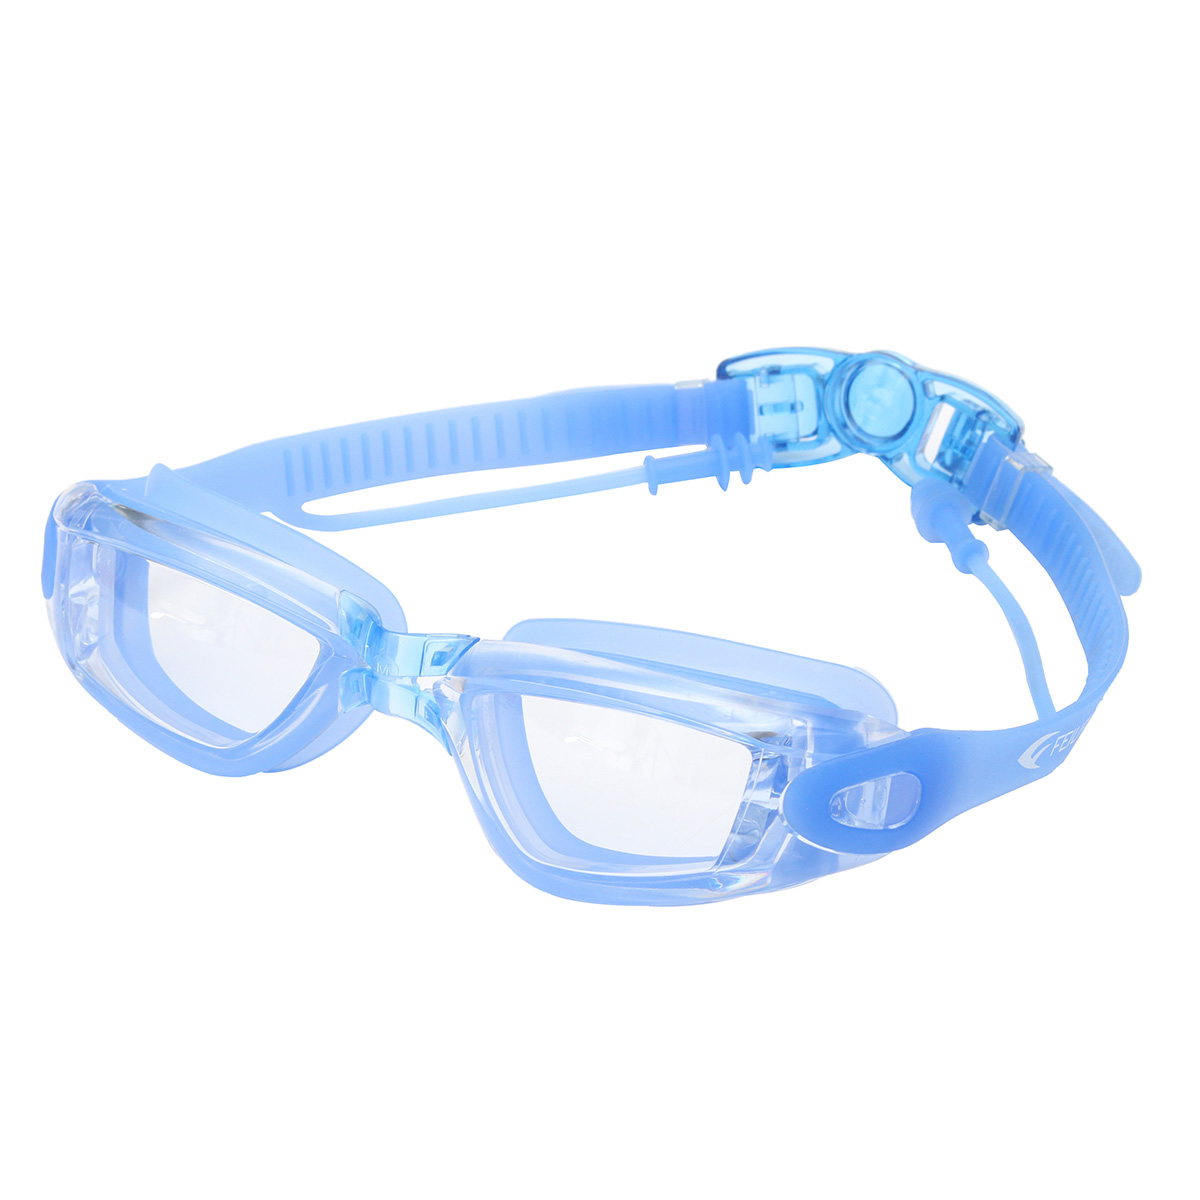 OUTERDO-Professional-Swimming-Goggles-with-Earbuds-Silicone-Unisex-Anti-Fog-No-Leaking-HD-Optical-Di-1888044-3